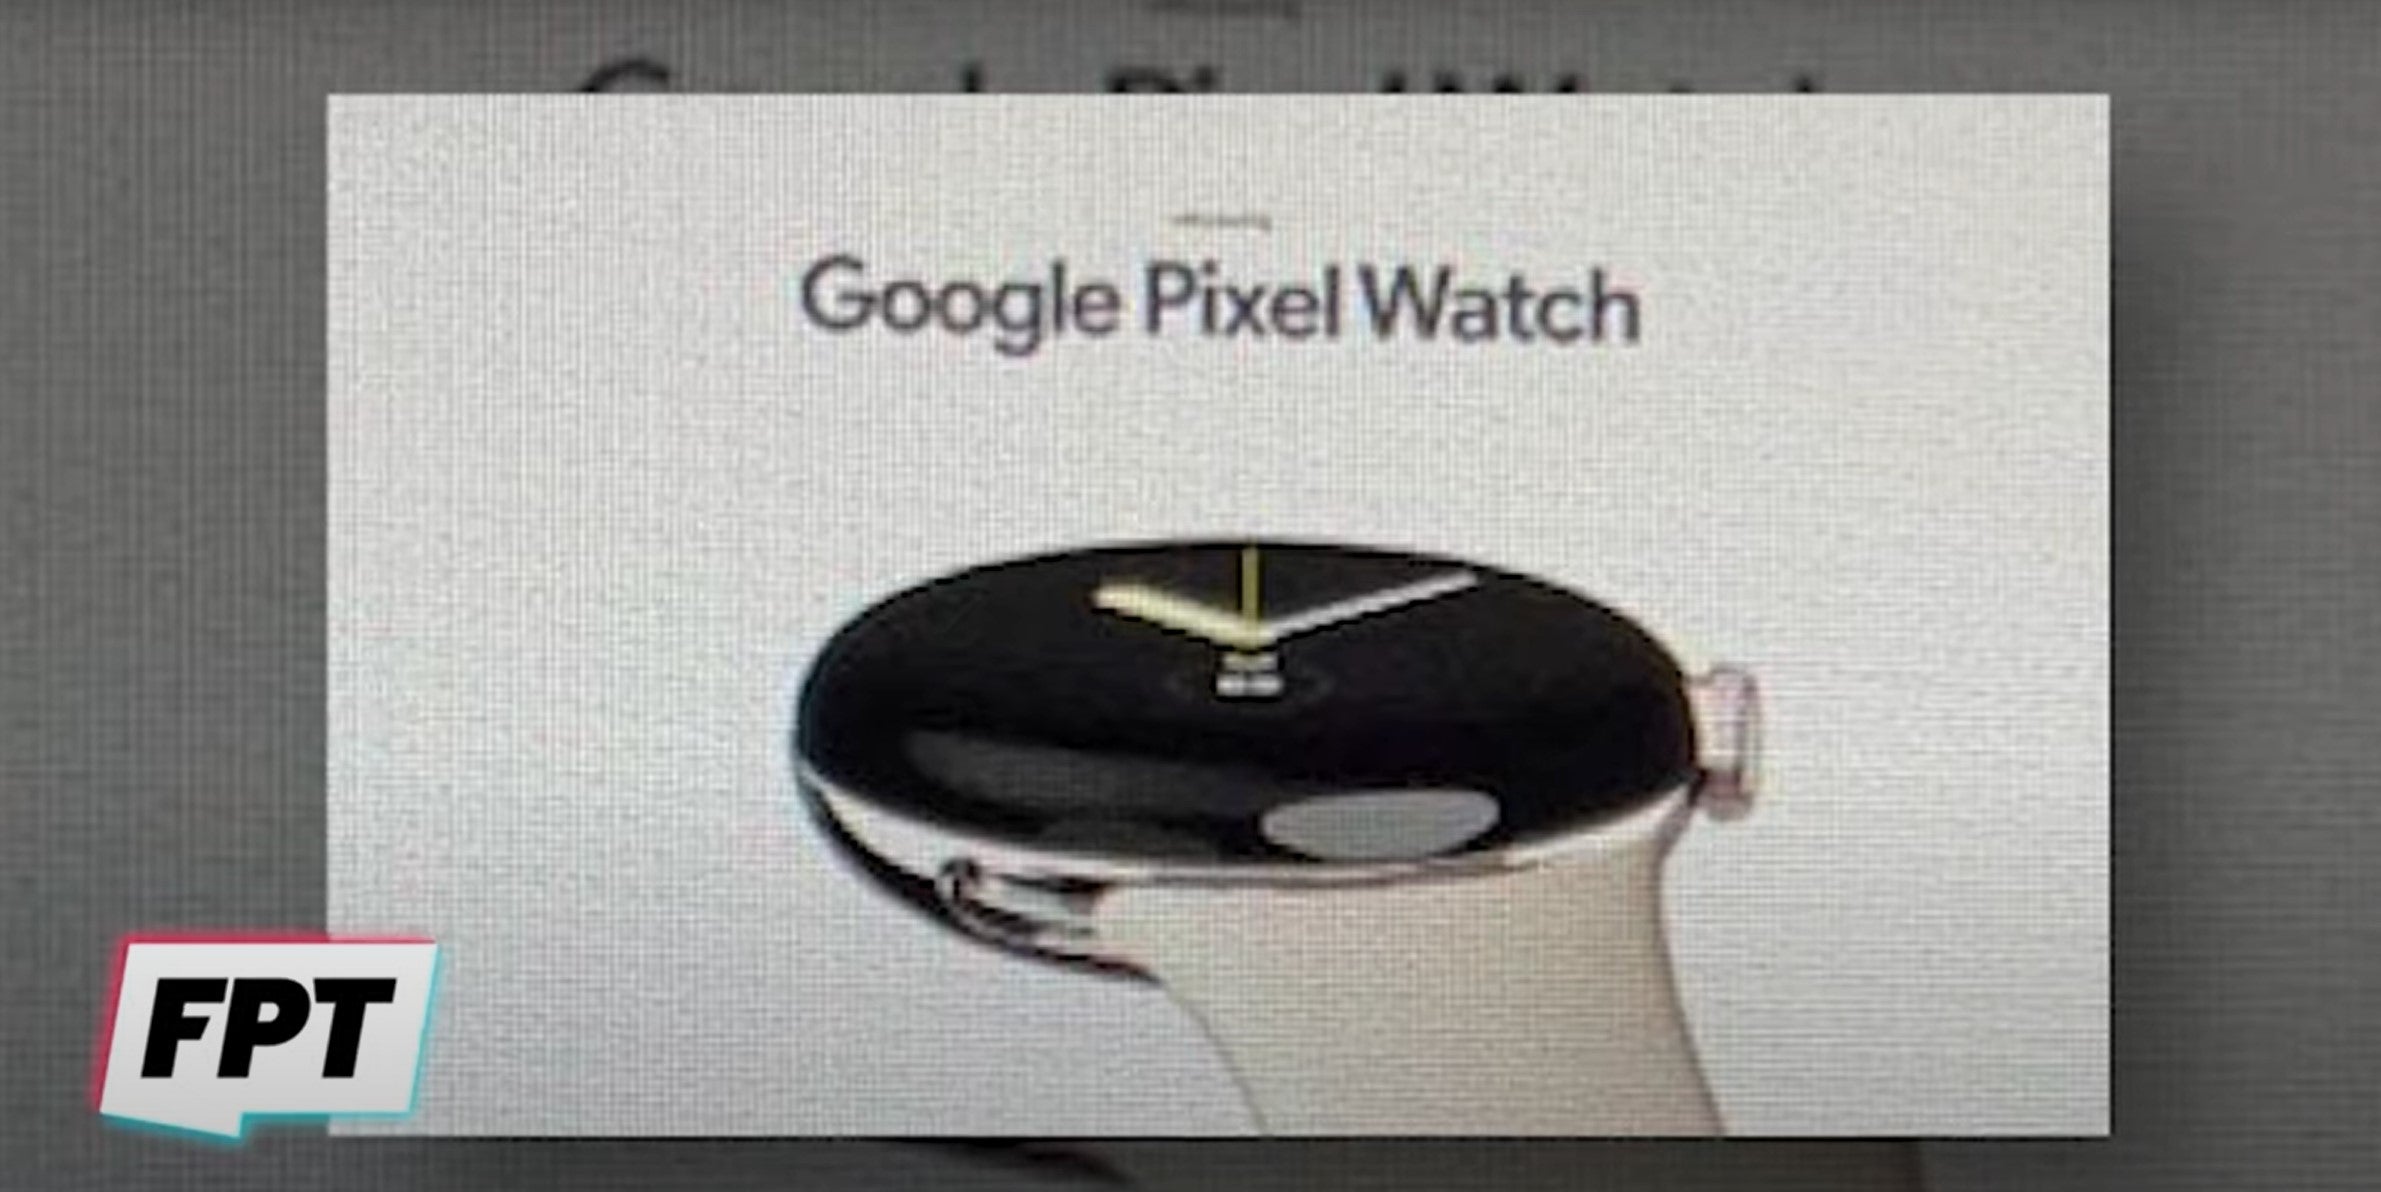 Google’s Pixel Watch Just Leaked, and My Anticipation Is Now Dangerously High